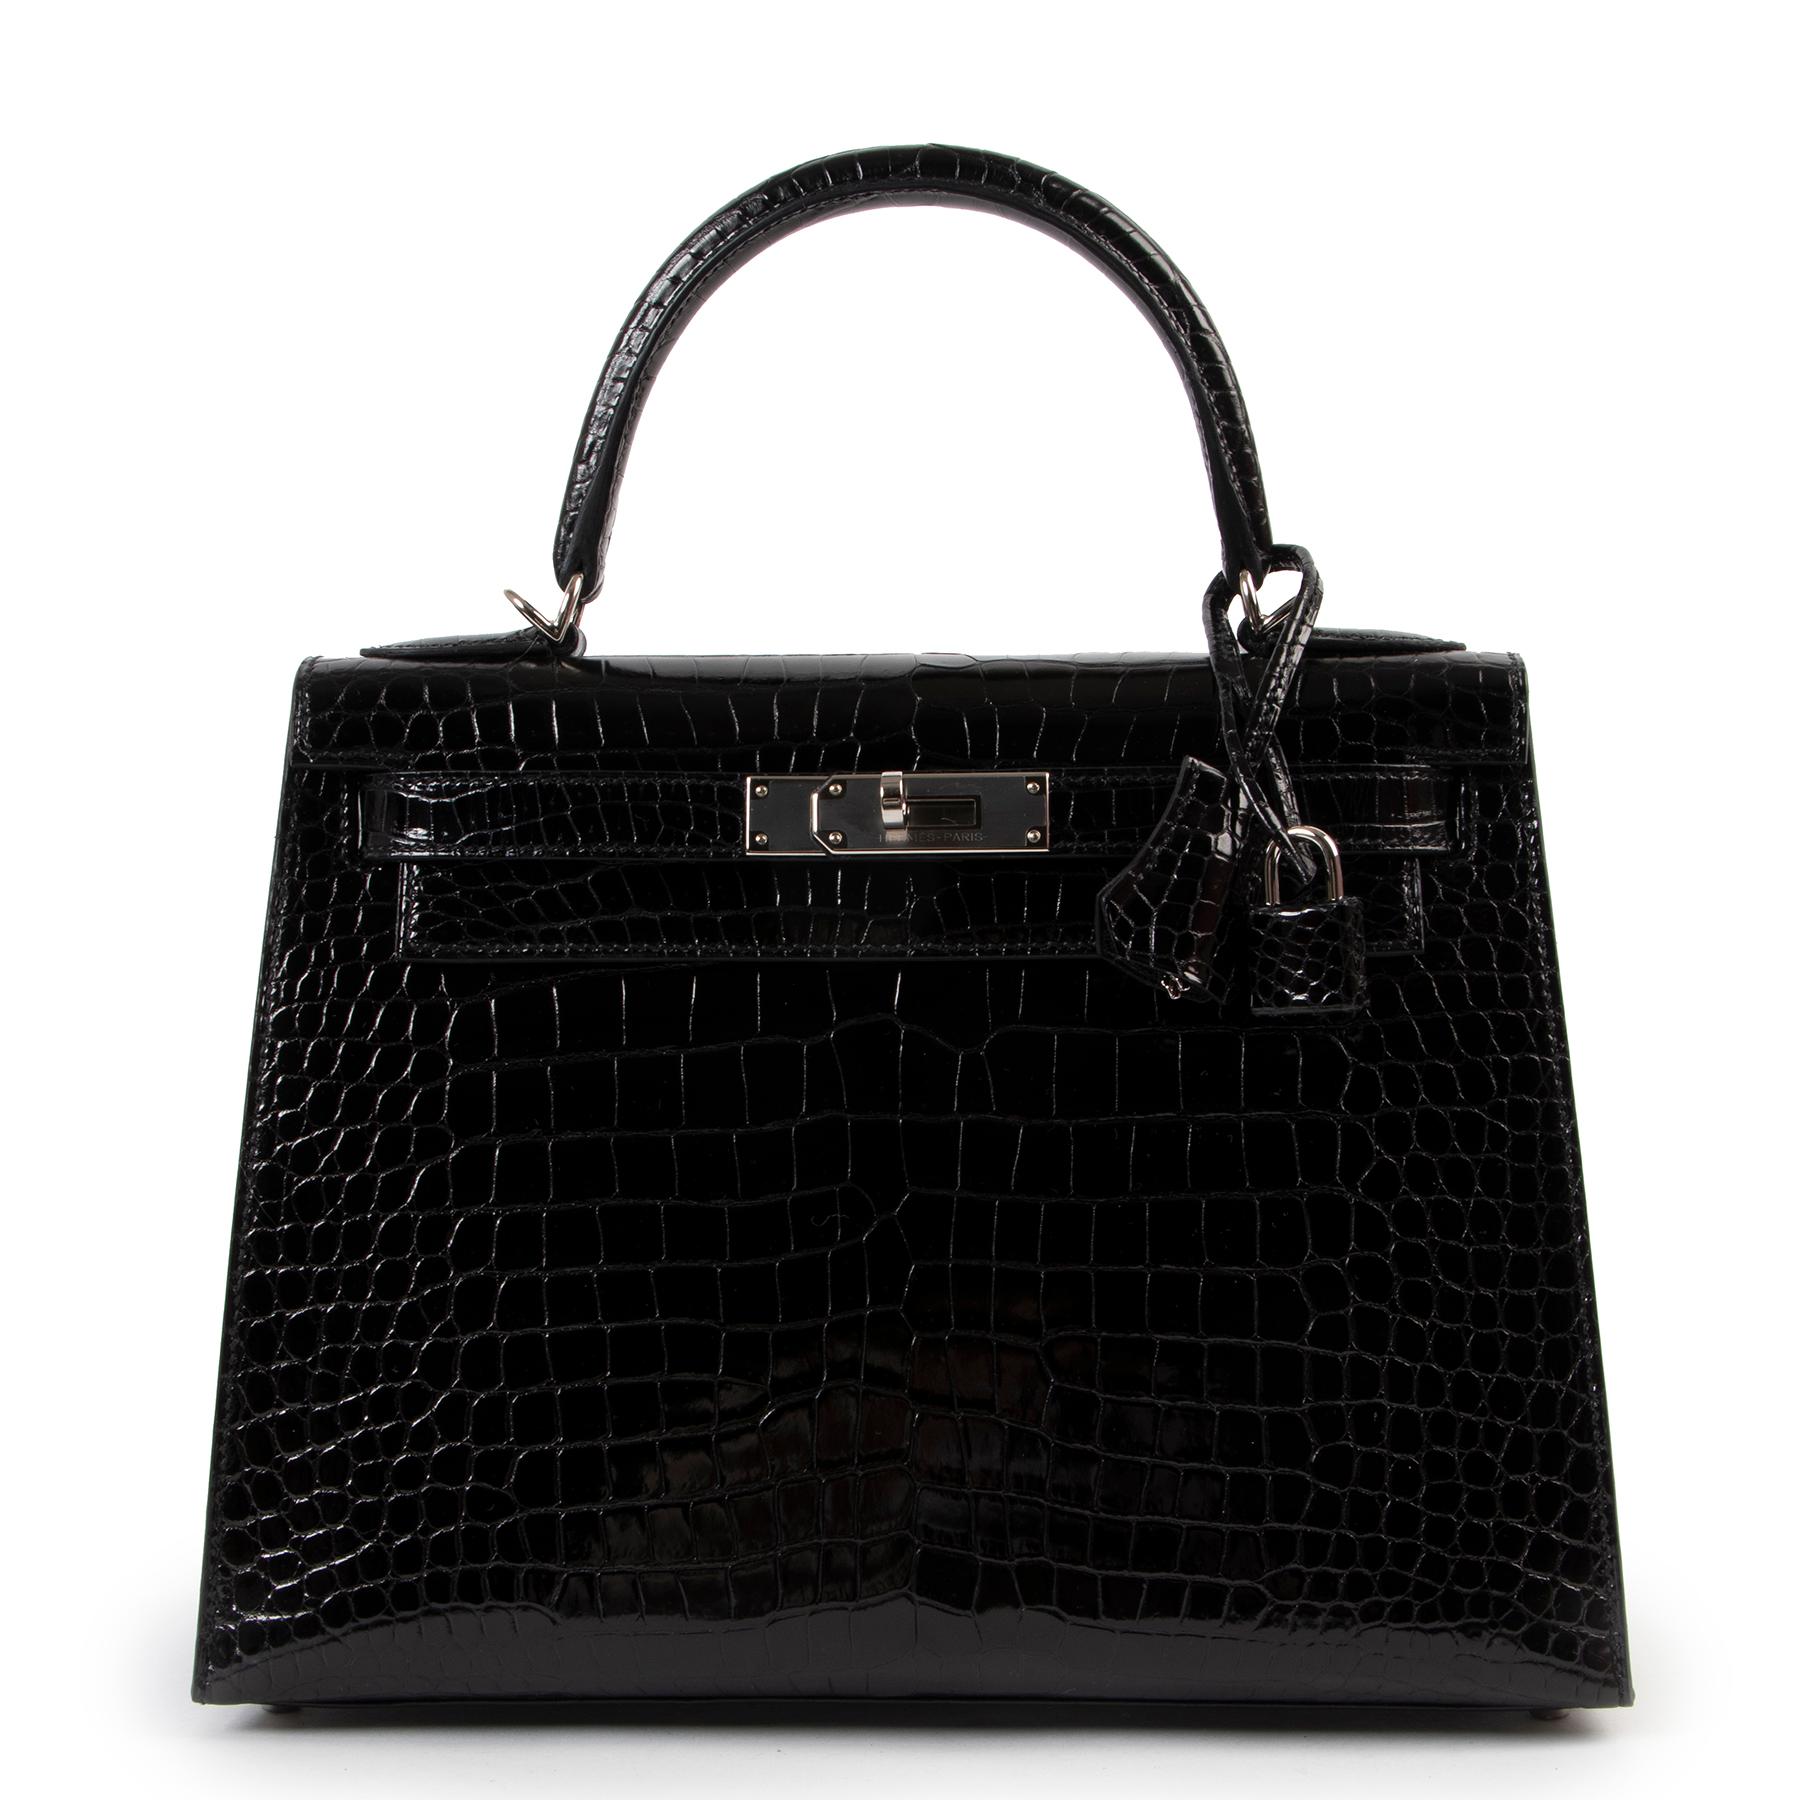 Get your hands on this very rare and hard to find HERMES Kelly 28 in crocodile Porosus Lisse. 
Crafted from shiny porosus crocodile skin, which is denoted by the circumflex symvol (^) in the embossing and often lauded as the most precious of the